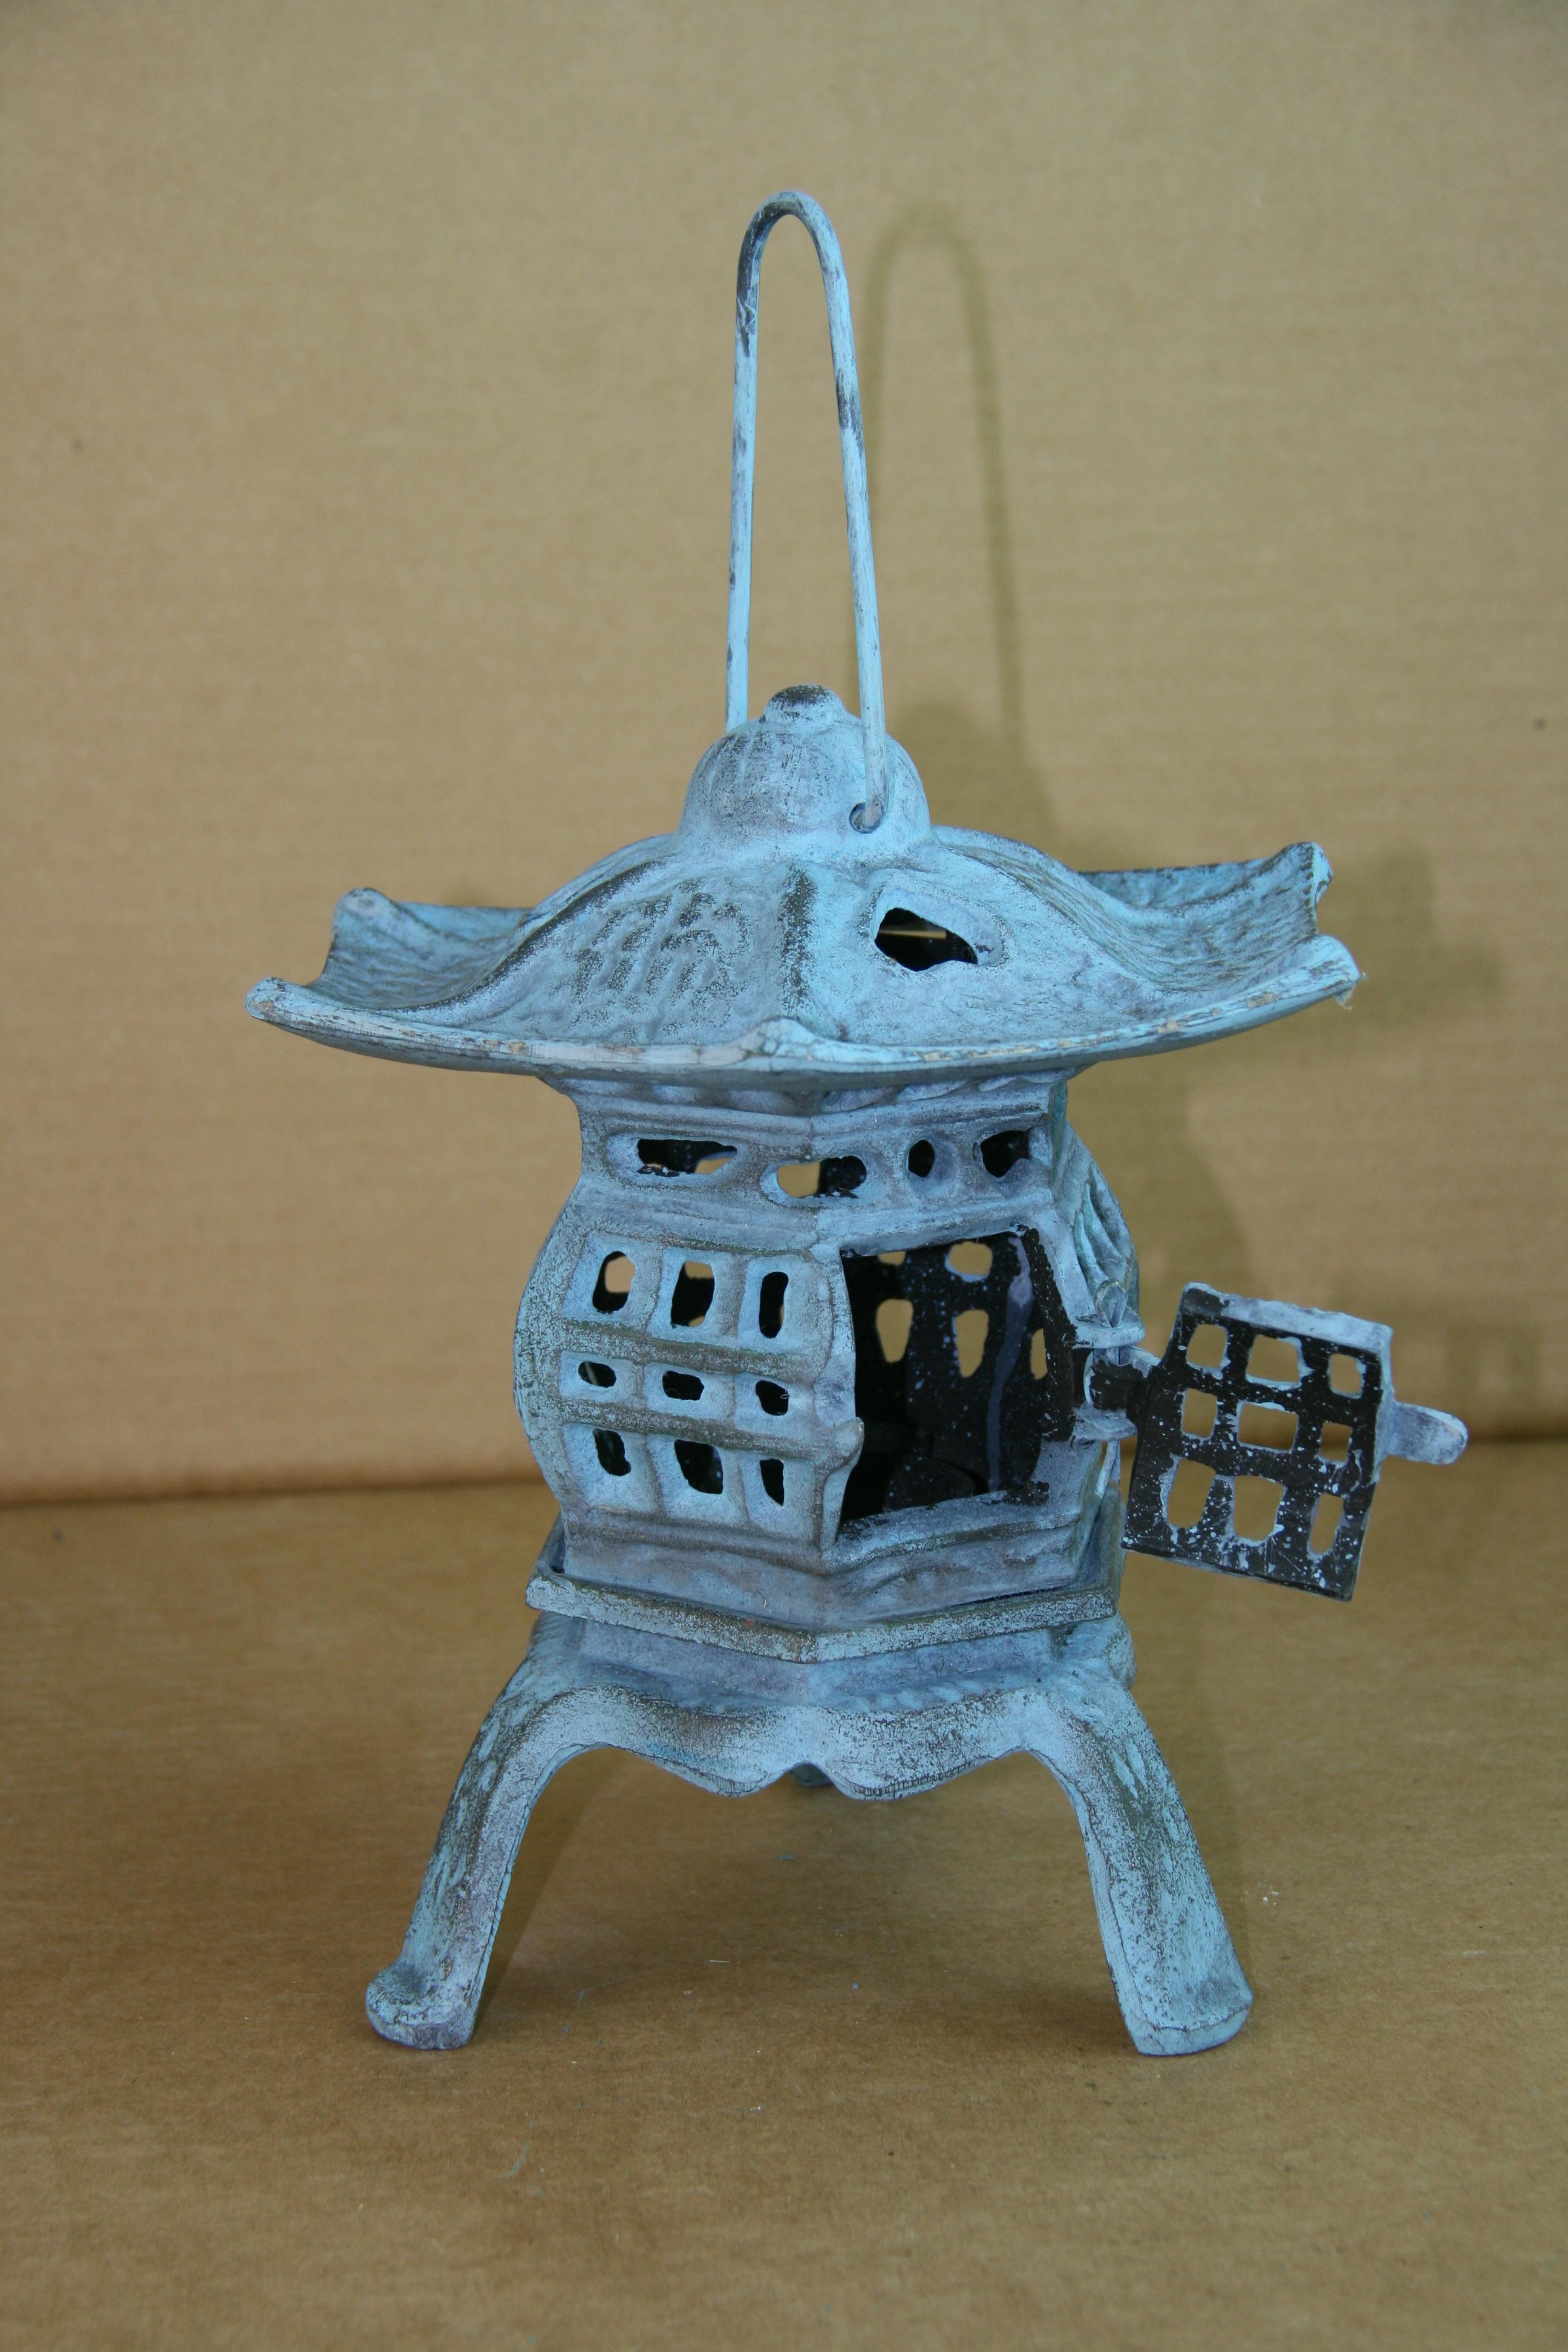 Japanese Robin Blue Heart Pagoda Garden Candle Lantern In Good Condition For Sale In Douglas Manor, NY